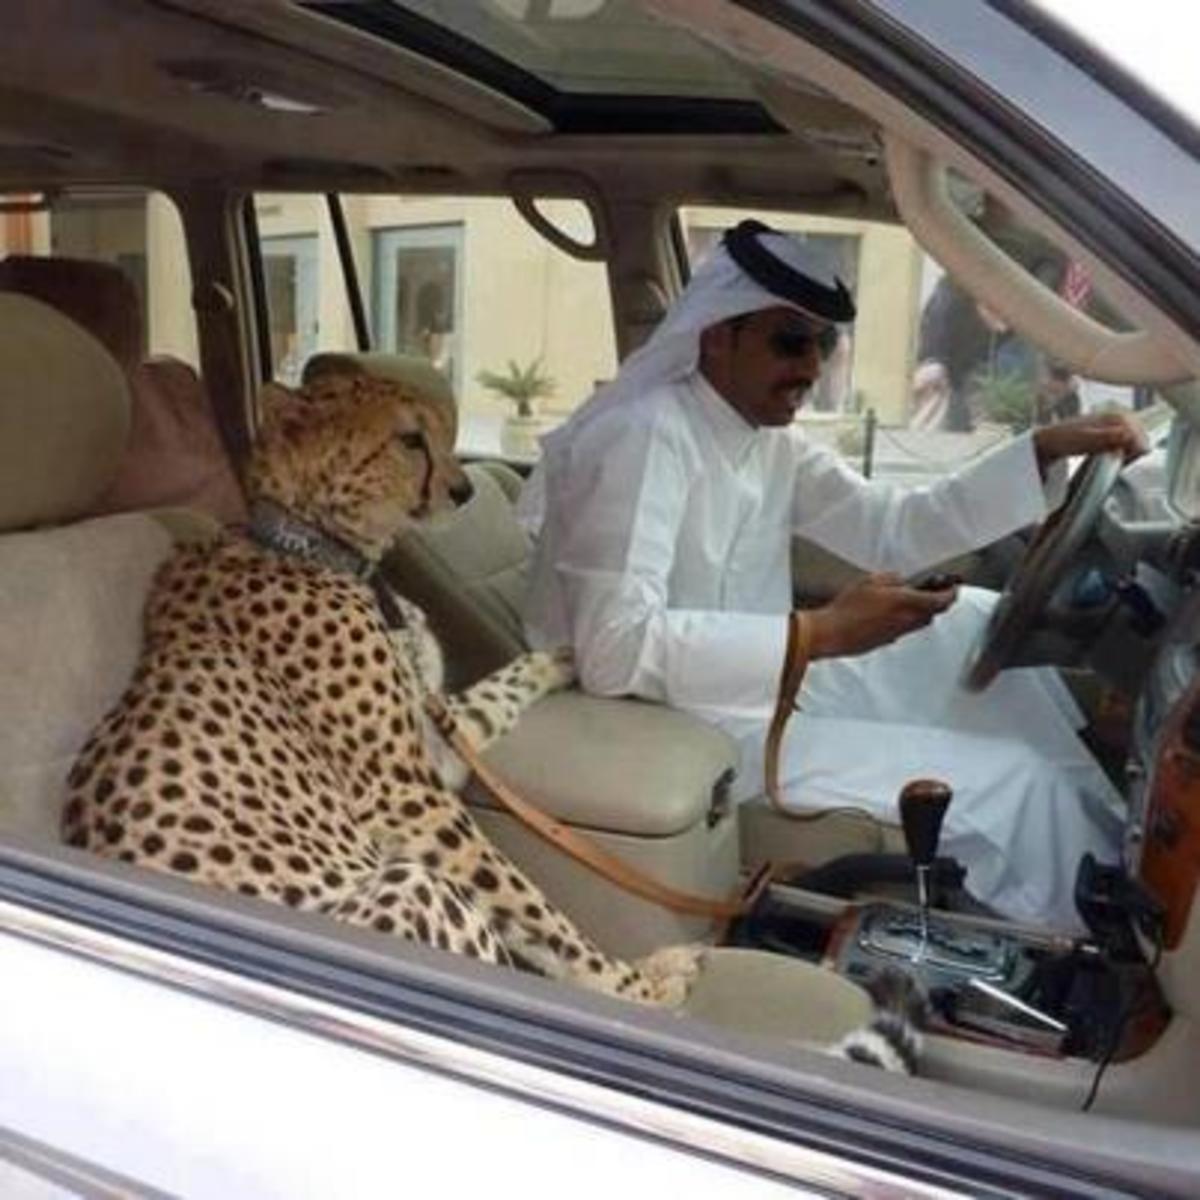 Cheetahs are status symbols for the wealthy because they are expensive and often illegal to obtain.